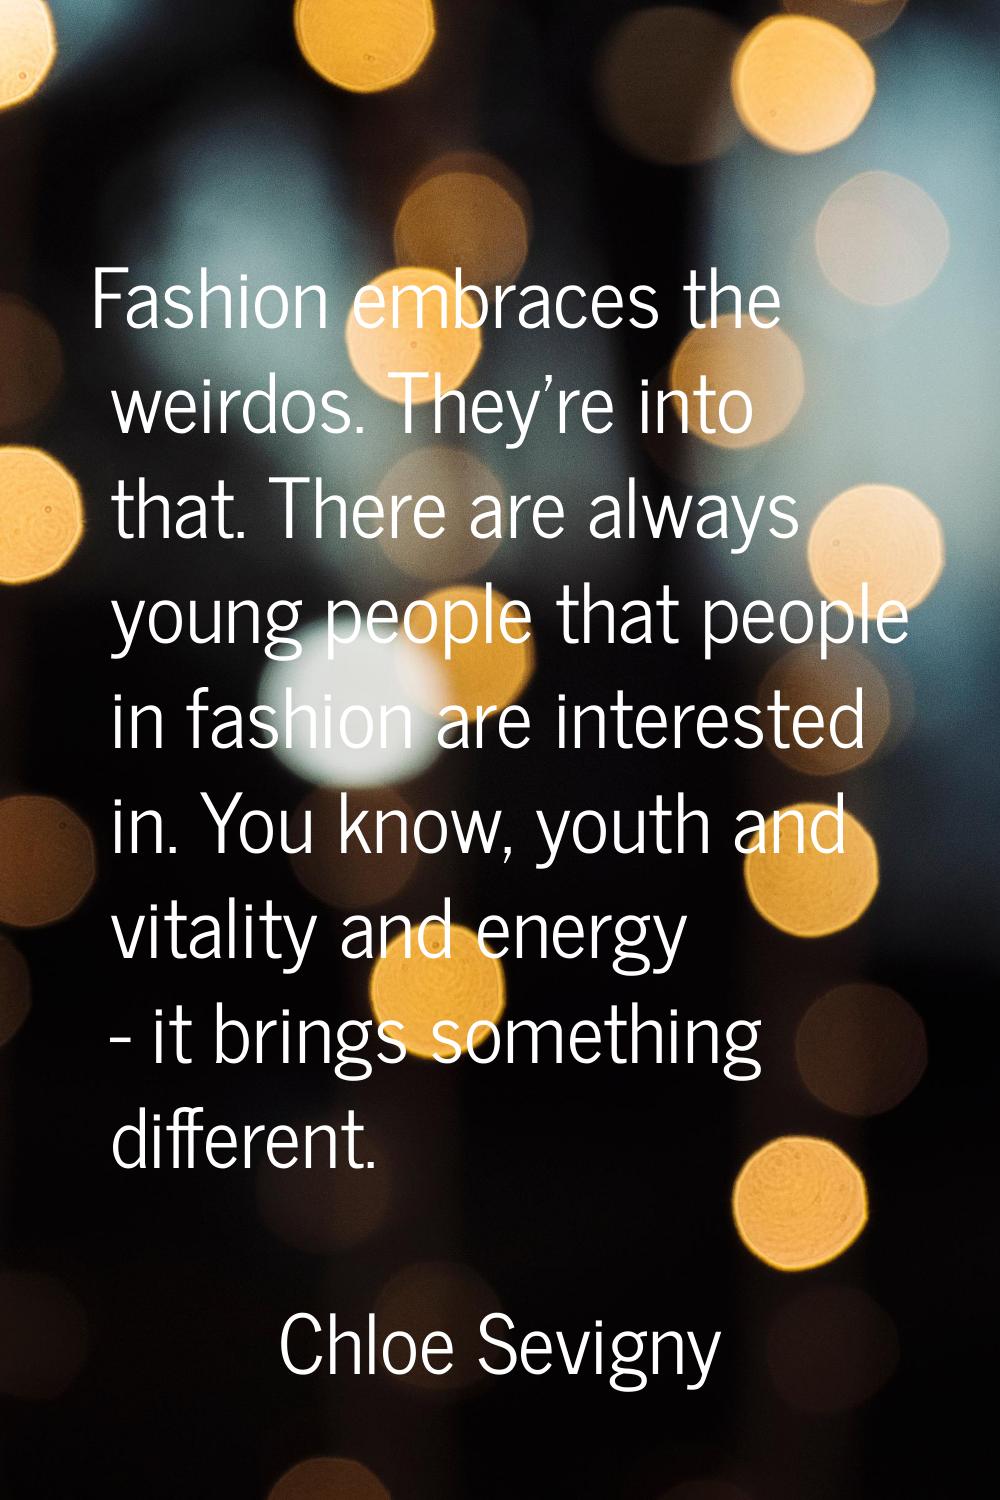 Fashion embraces the weirdos. They're into that. There are always young people that people in fashi